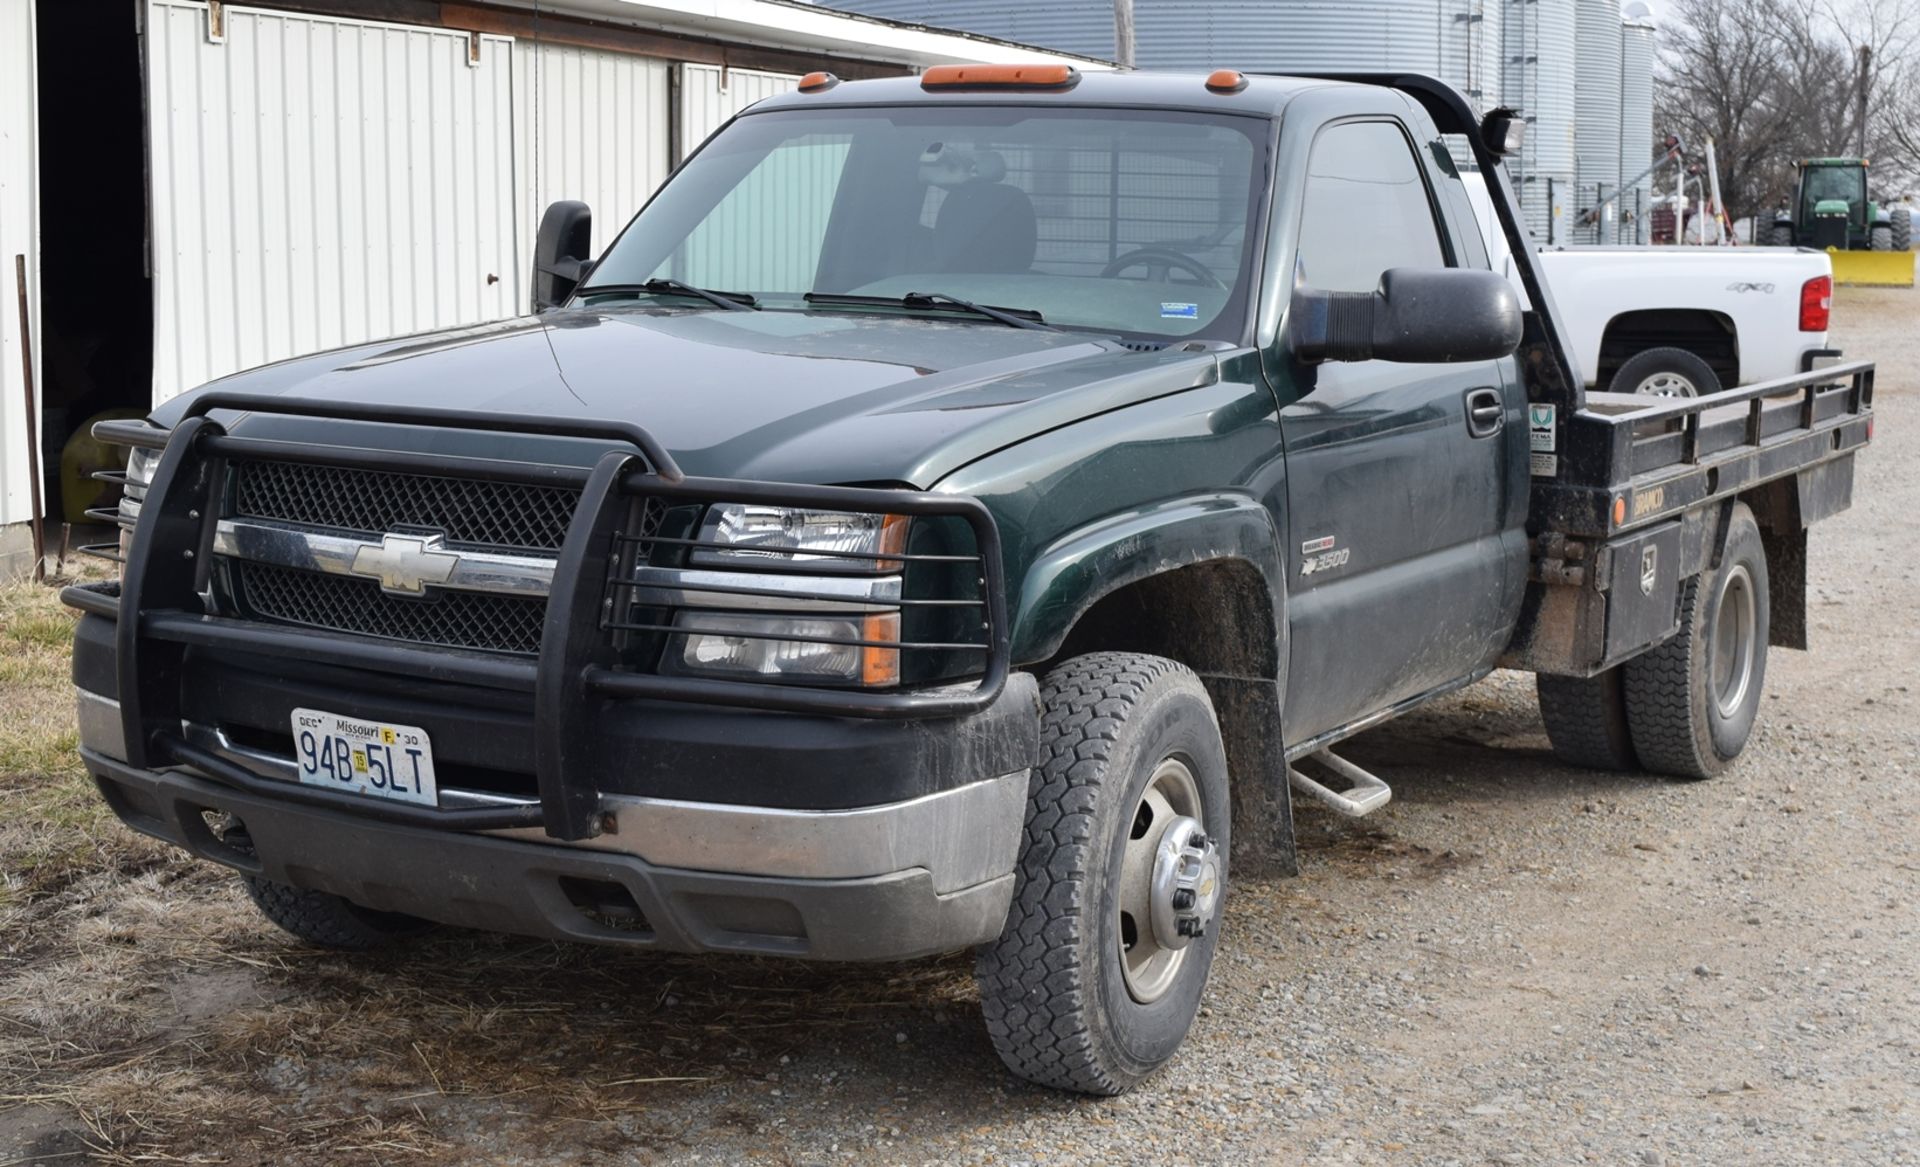 Lot 1076 2004 Chevy 3500 Duramax 4x4 dually flatbed with hydro bale spike, 6-speed manual